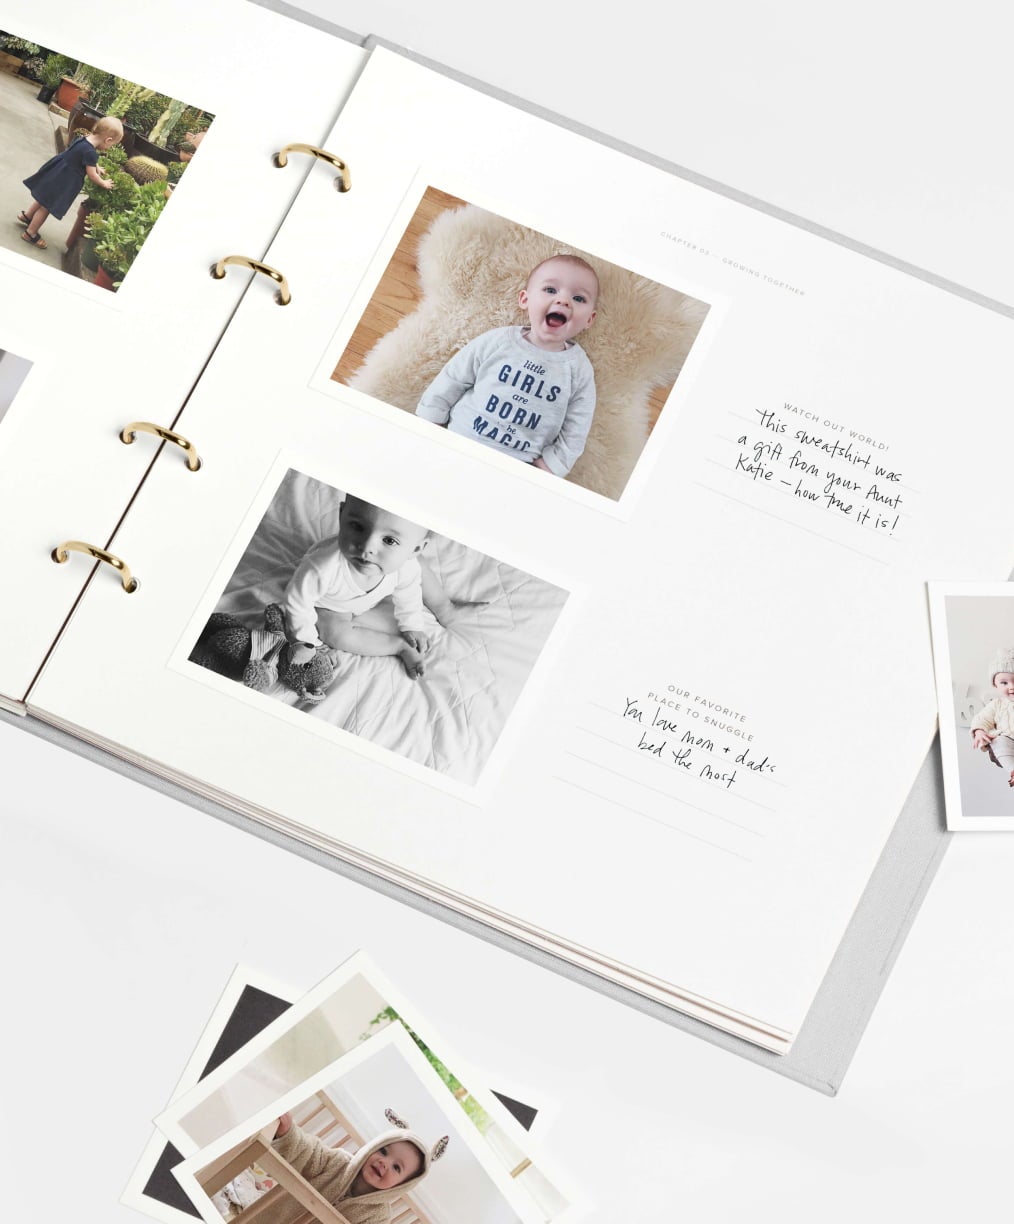 Open baby scrapbook with photos of baby and handwritten notes